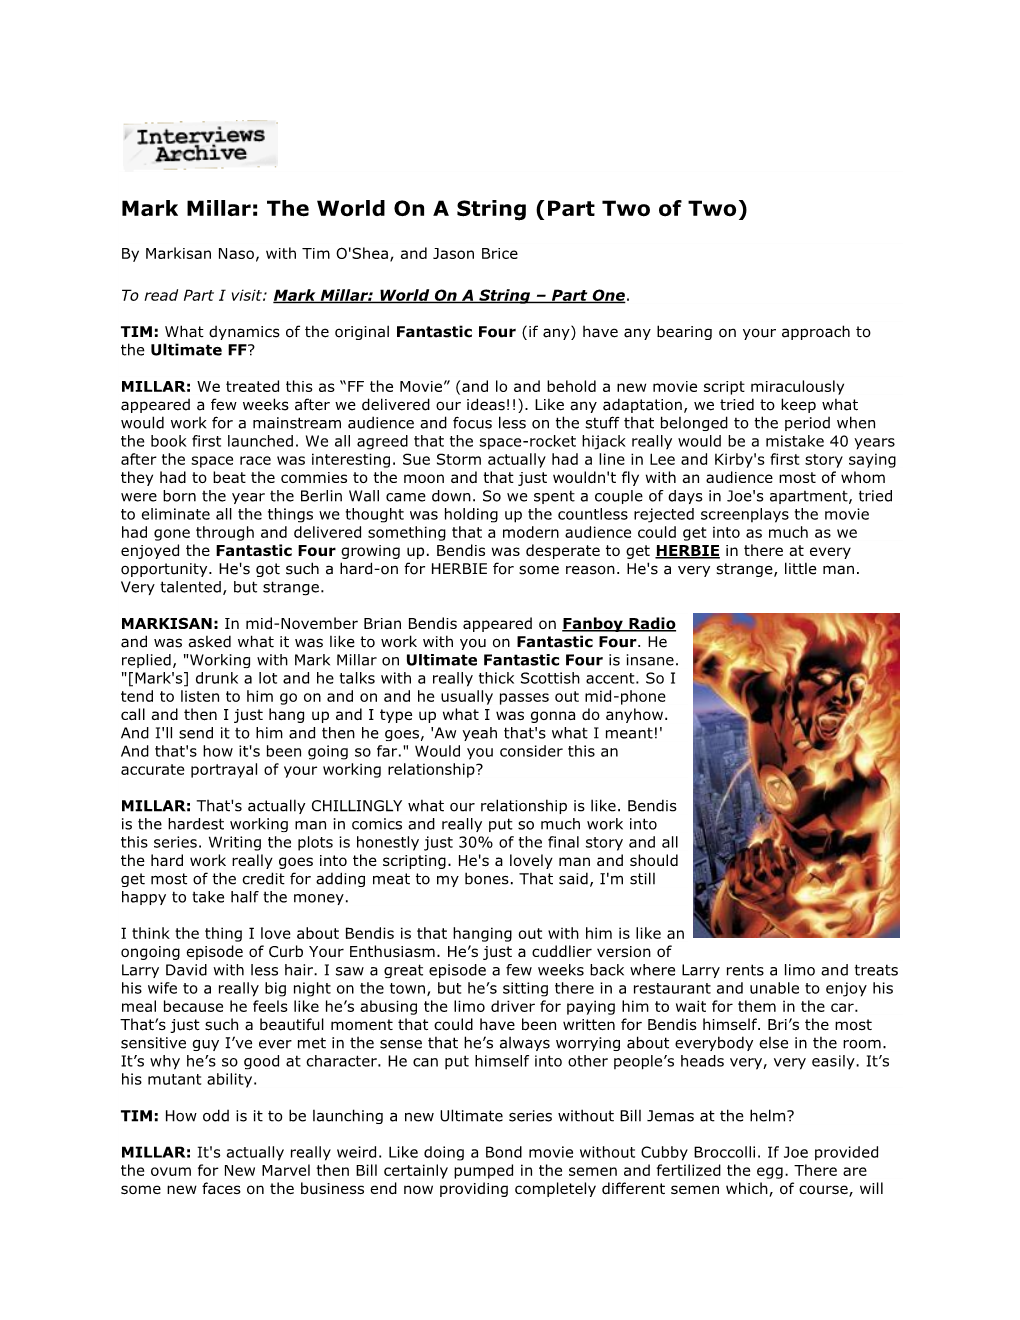 Mark Millar: the World on a String (Part Two of Two)